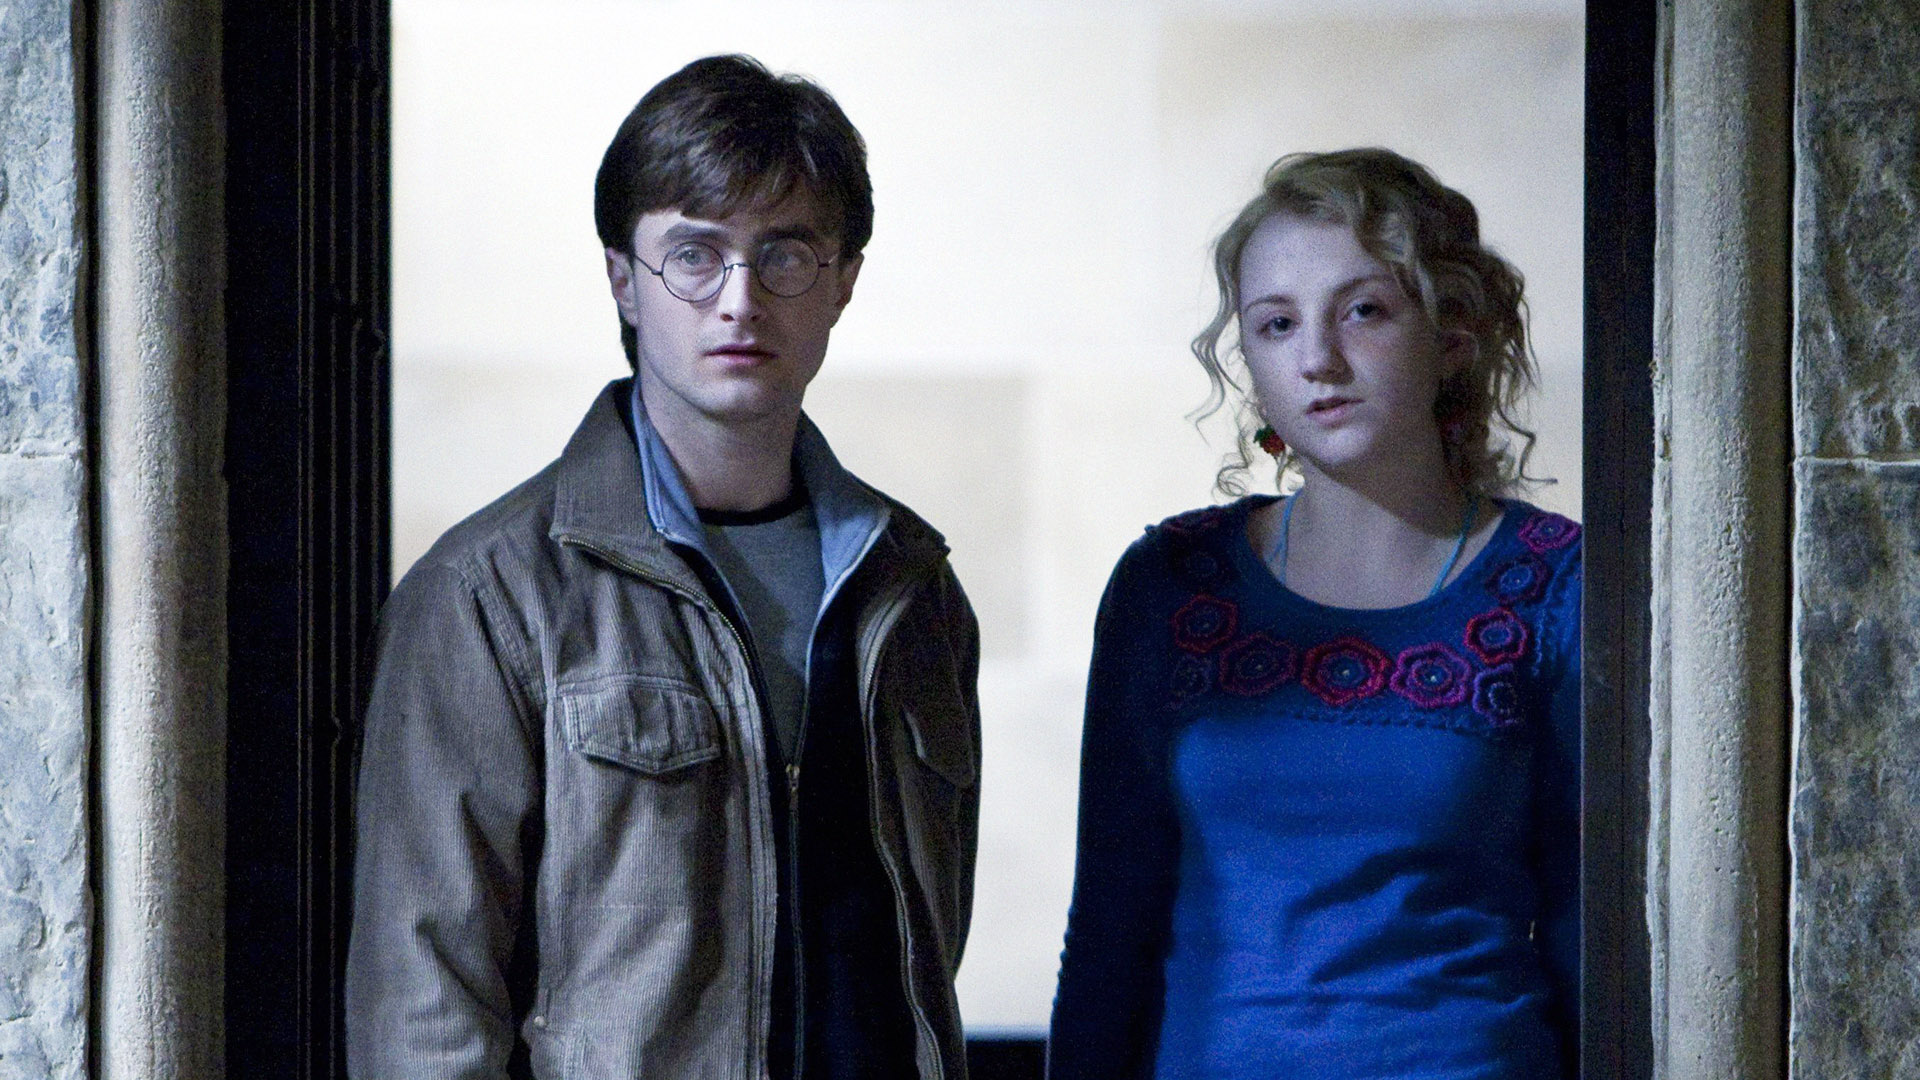 Harry Potter Books Lost Their Magic? 7 New Books to Read in 2023